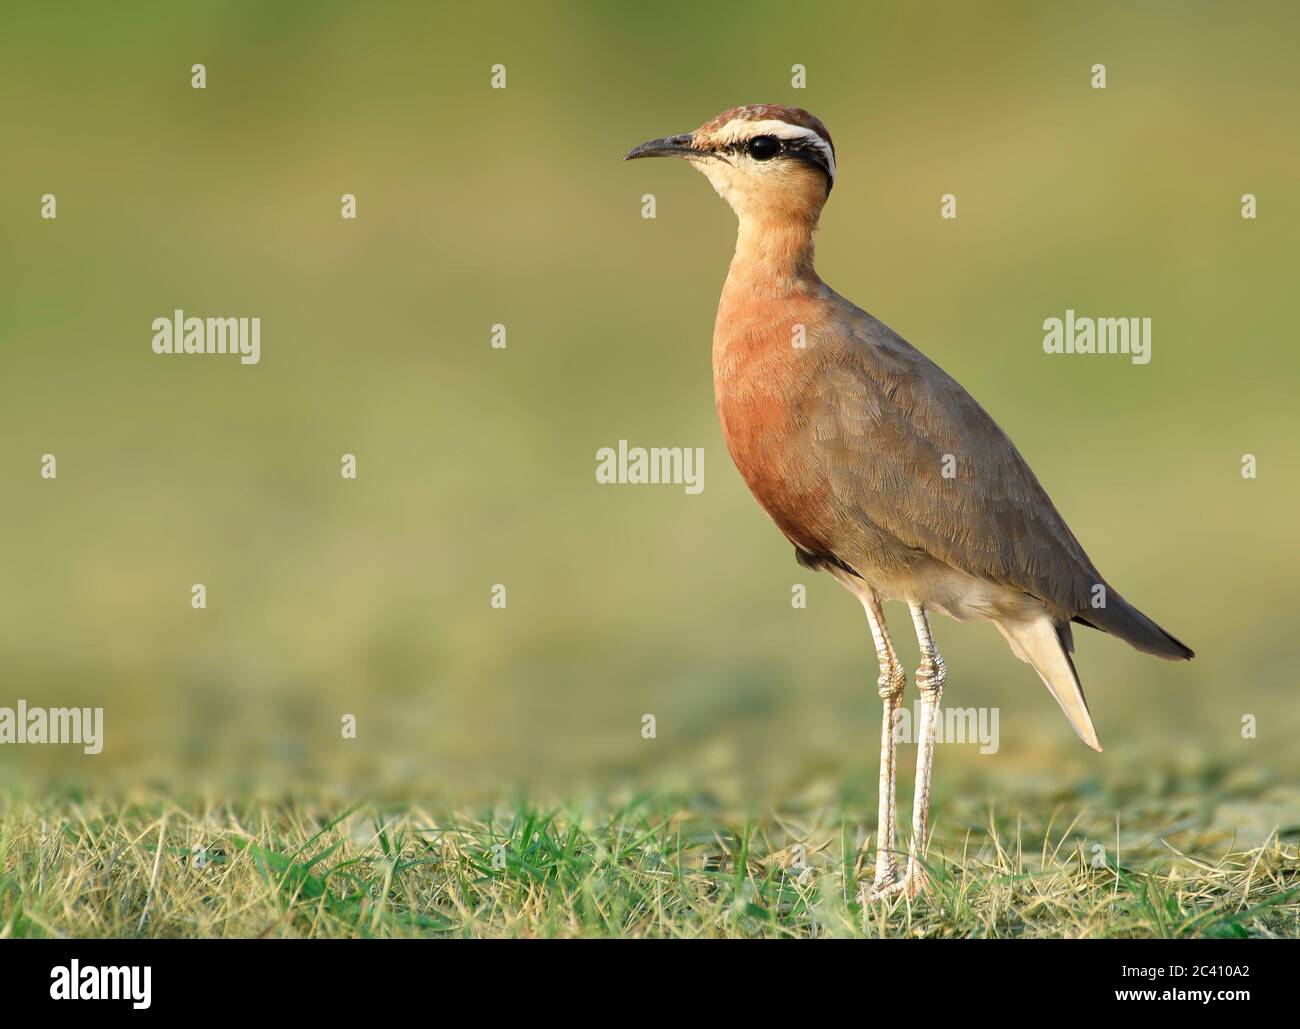 The Indian courser is a species of courser found in mainland South Asia, mainly in the plains bounded by the Ganges and Indus river system. Stock Photo